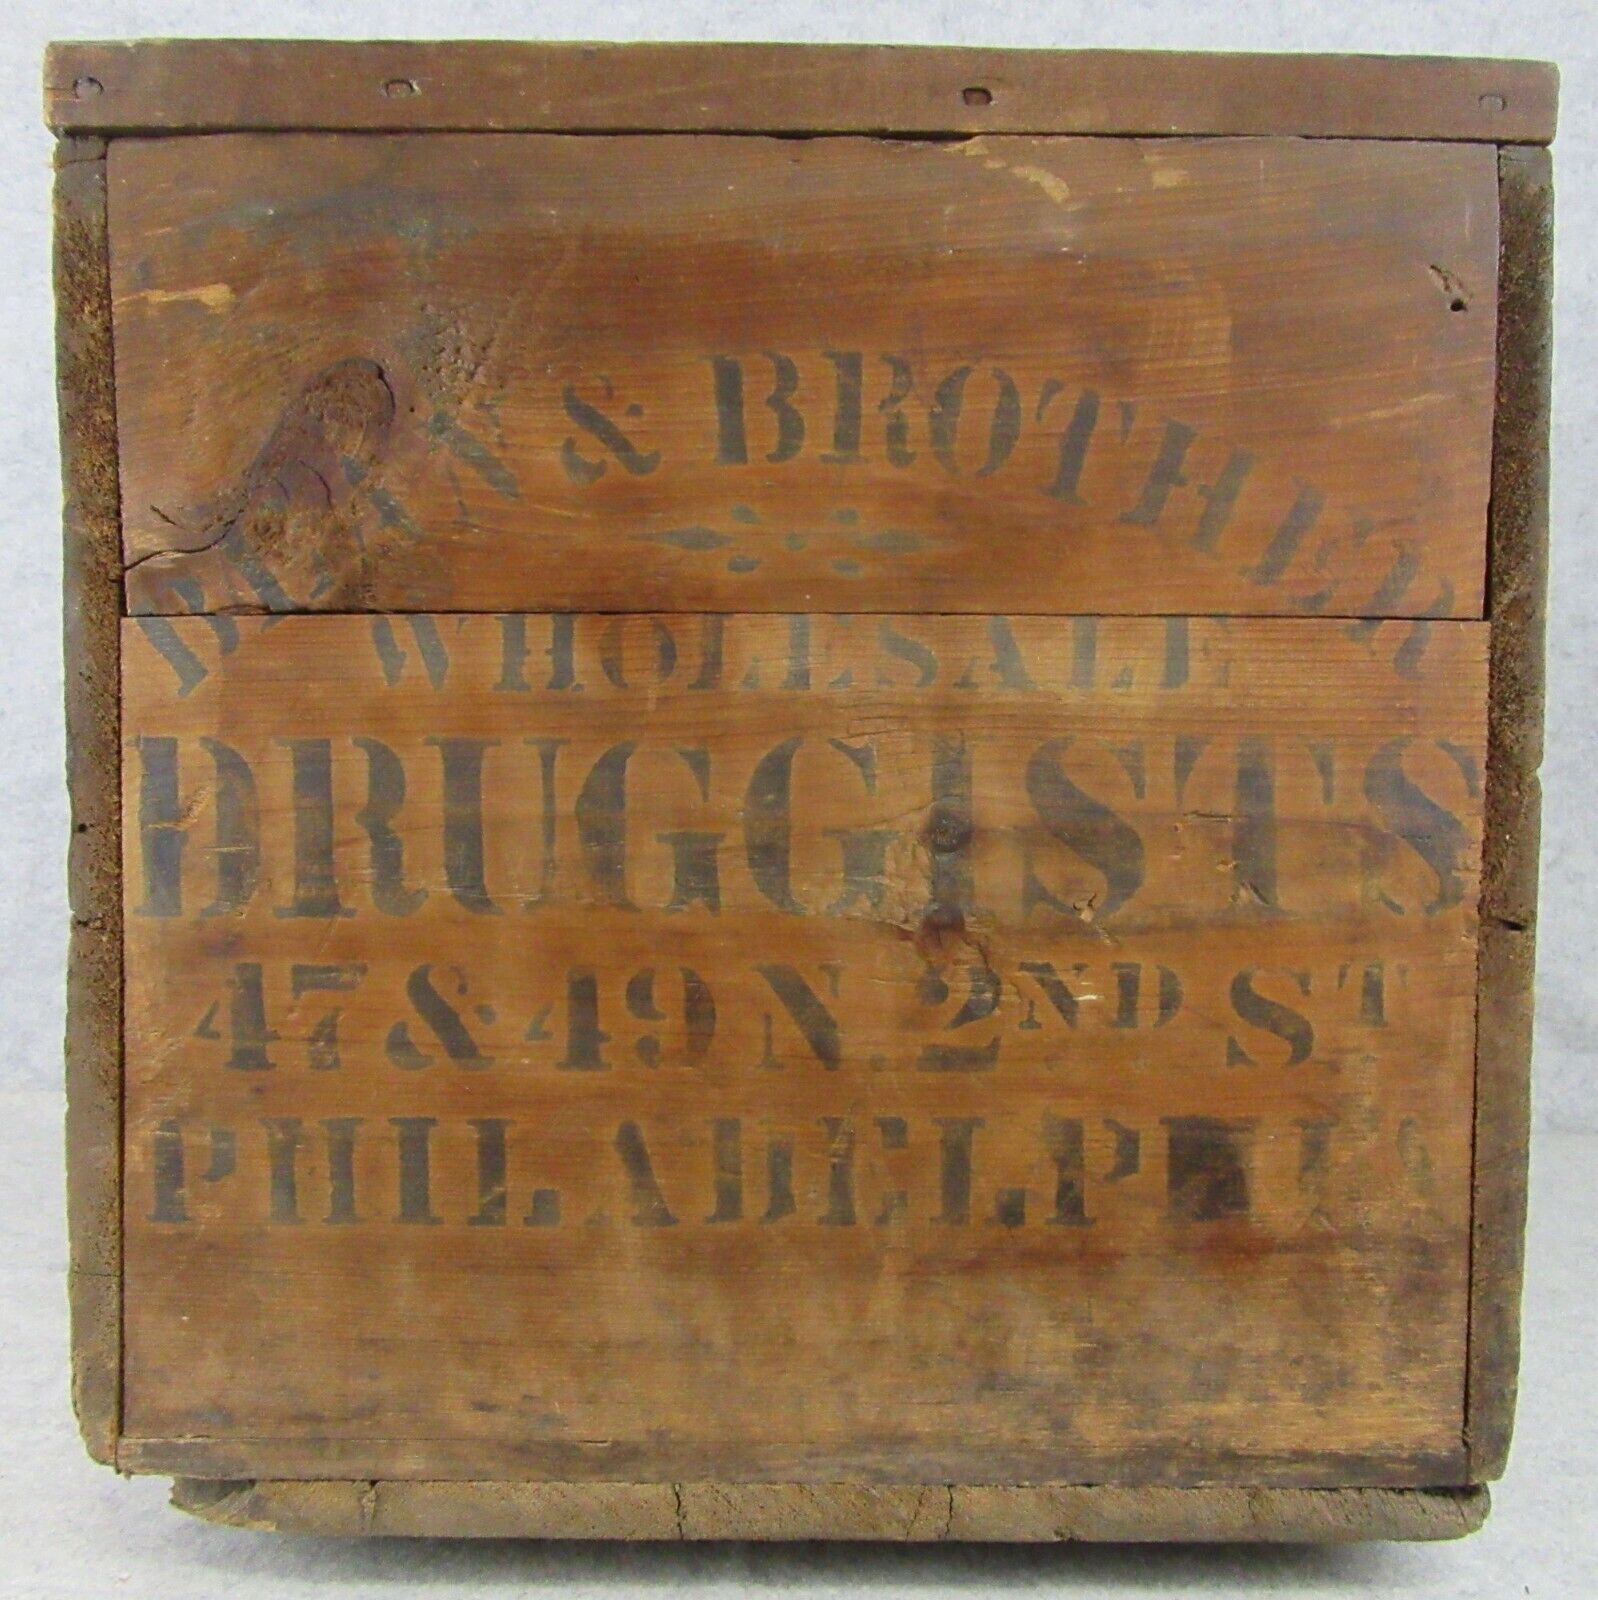 Rare Antique 1870s Indian Queen Perfume Bean Brother Druggist Shipping Box Crate